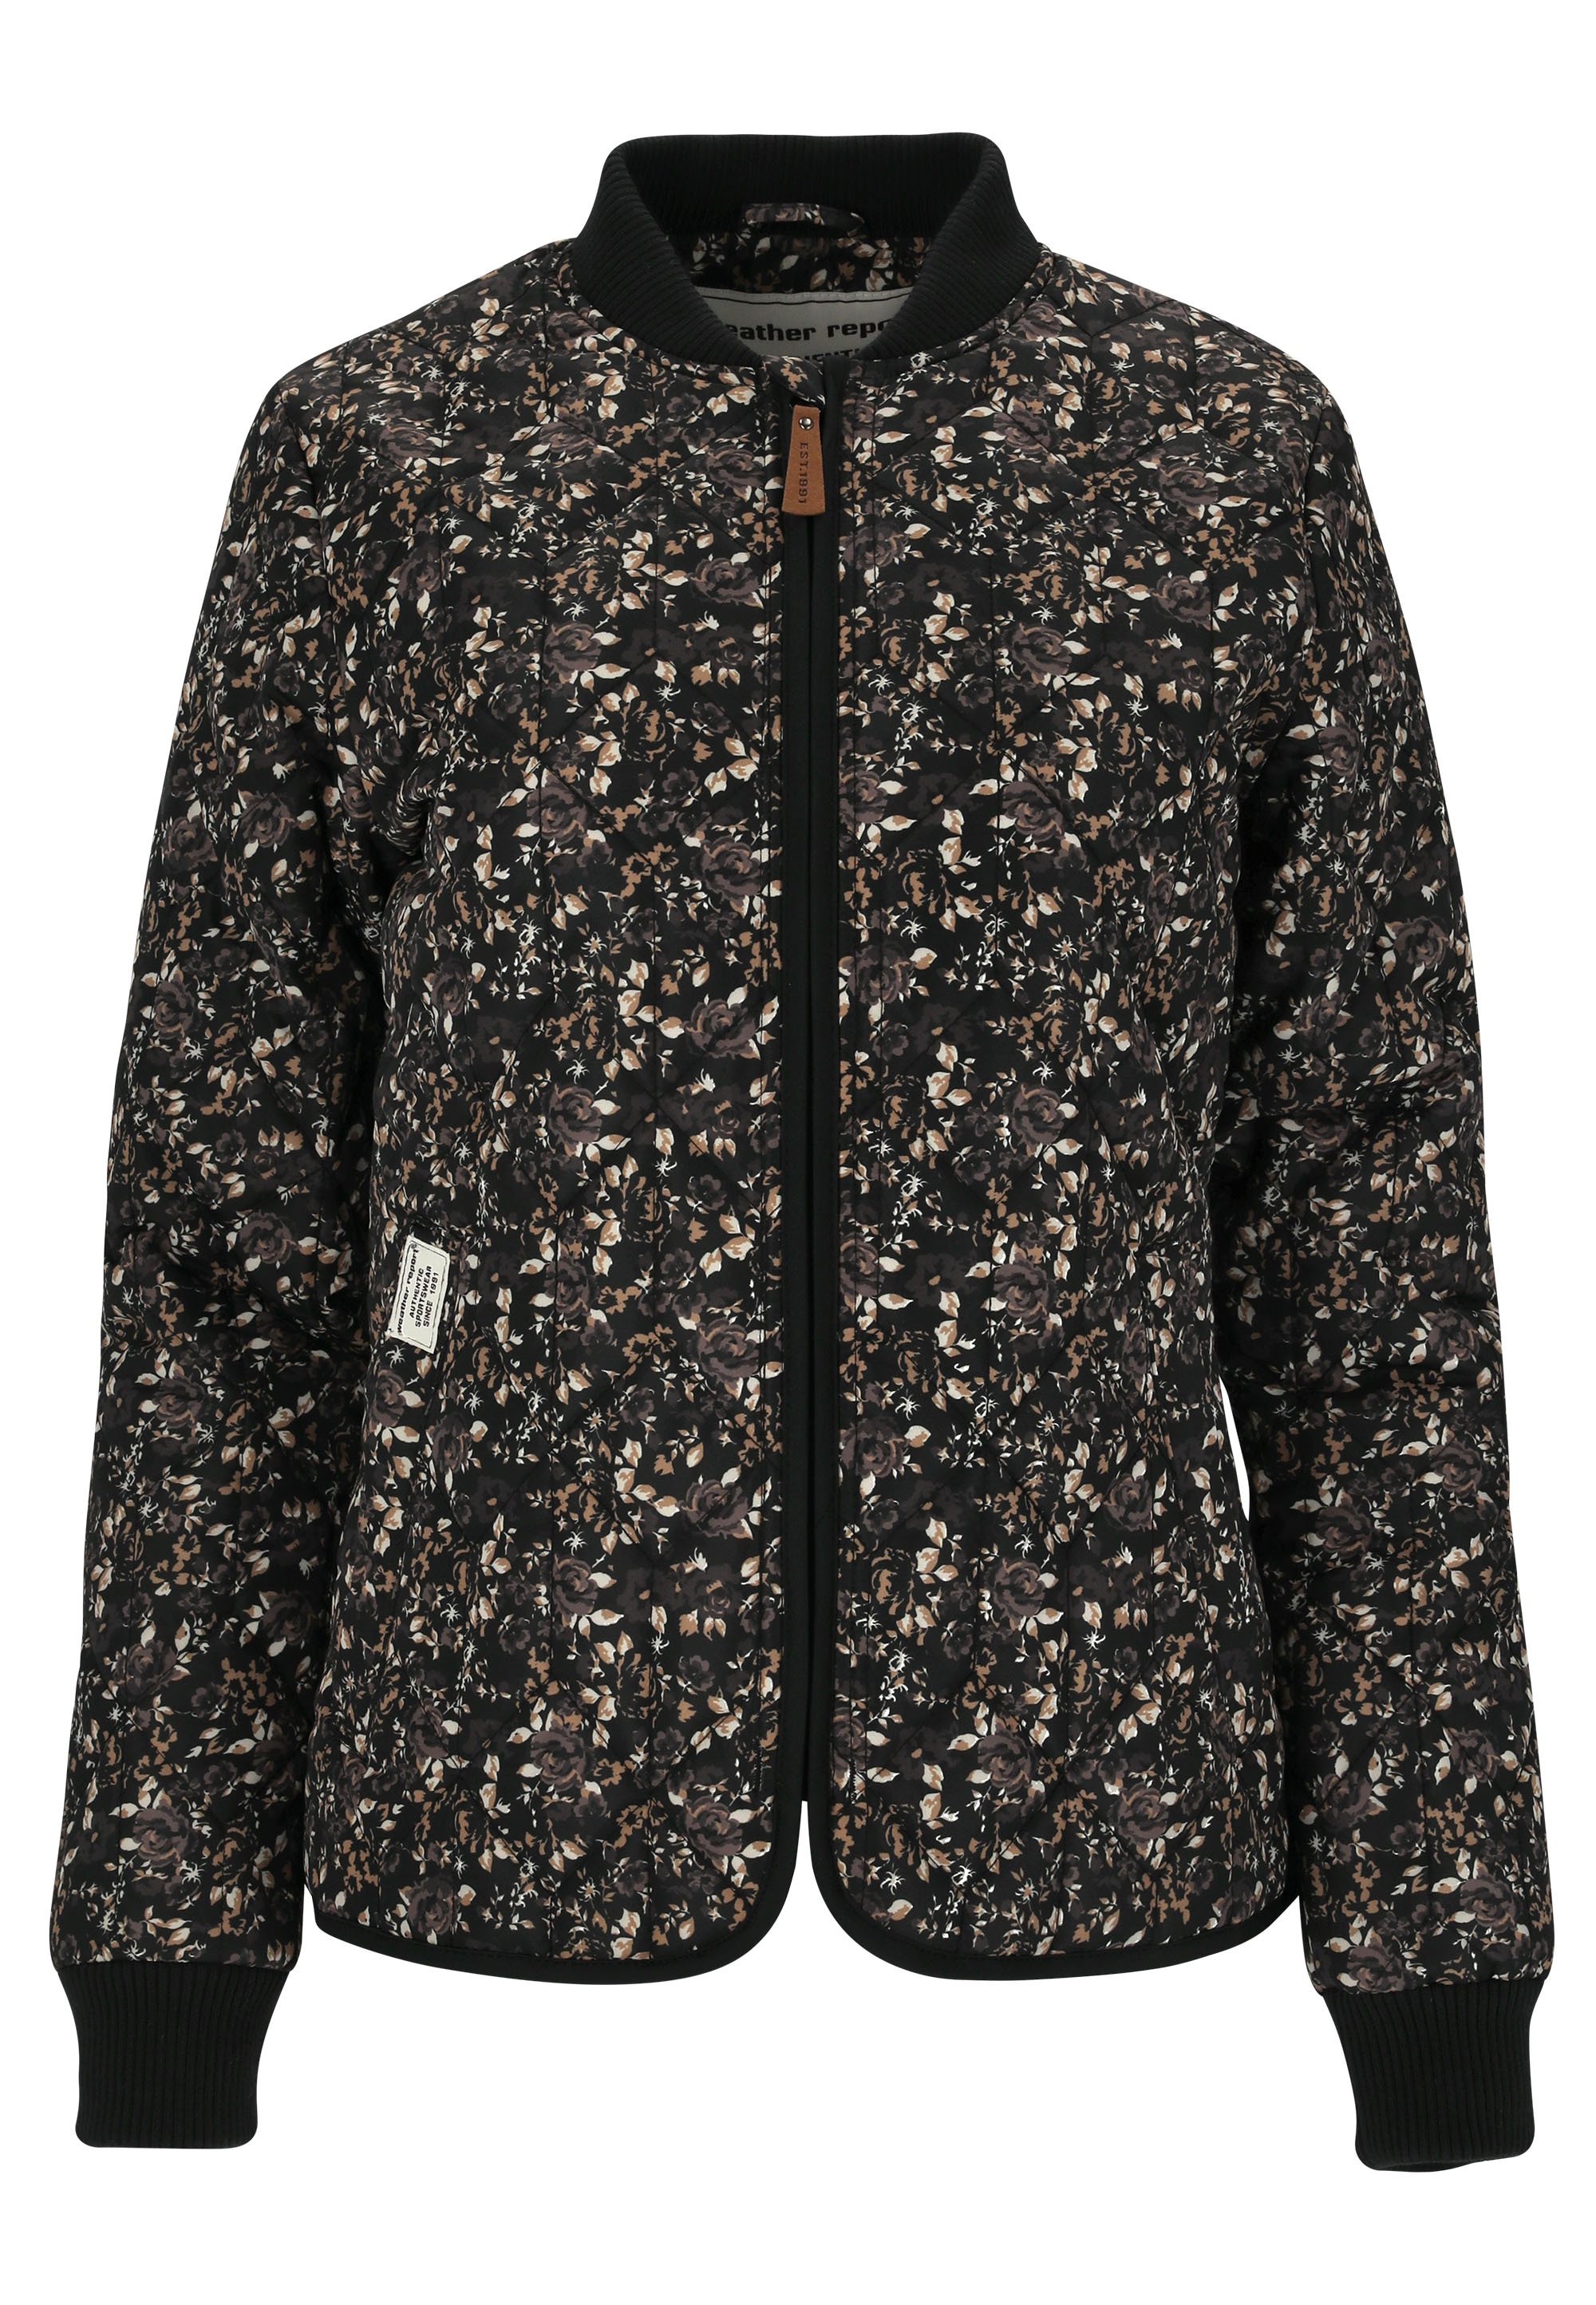 mit online »Floral«, floralem Outdoorjacke Allover-Muster WEATHER REPORT